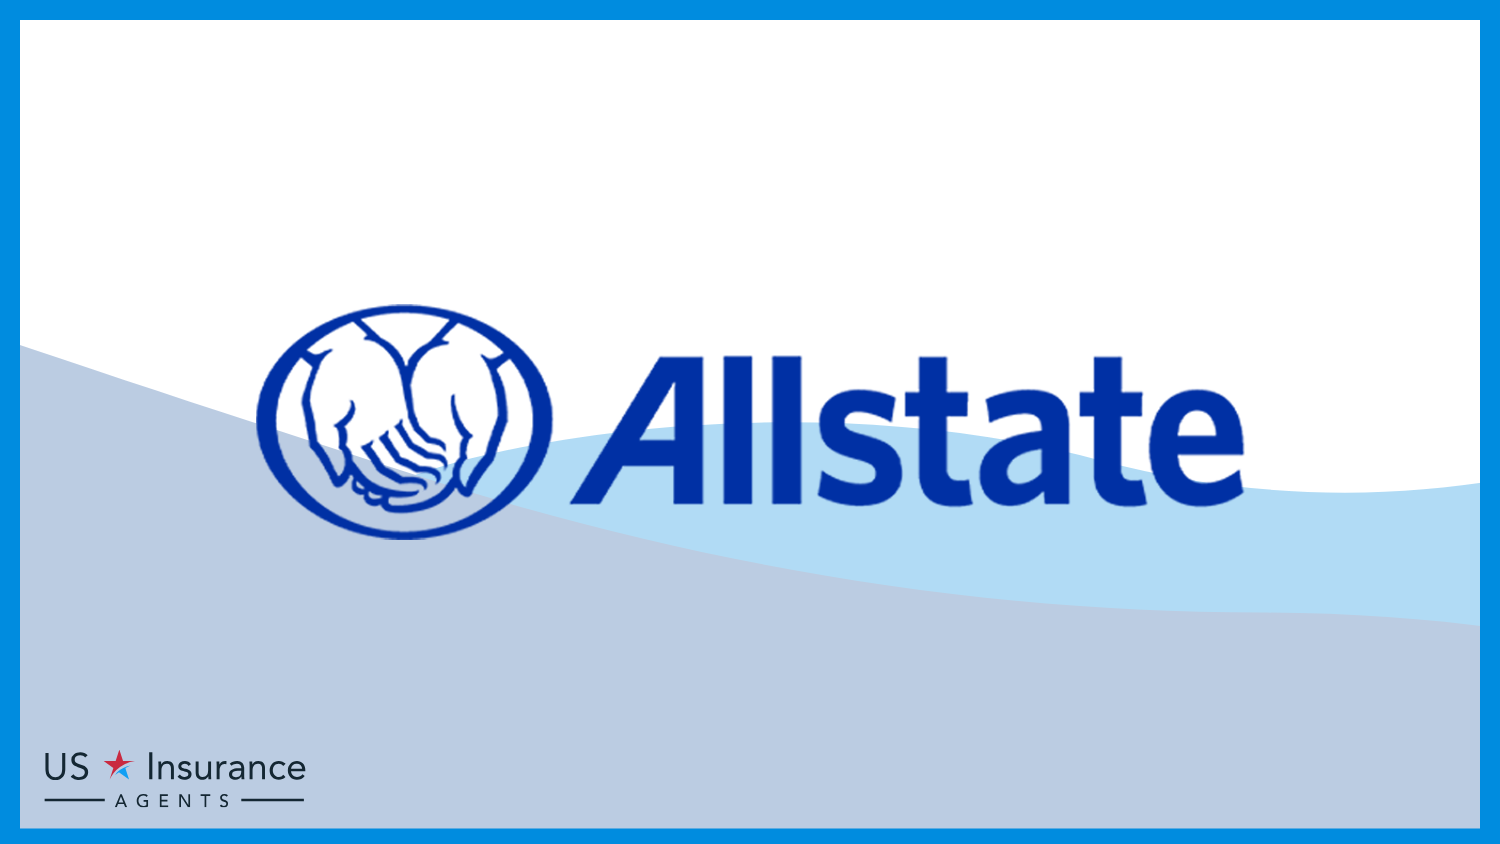 Allstate: Best Business Insurance for Interior Designers and Decorators